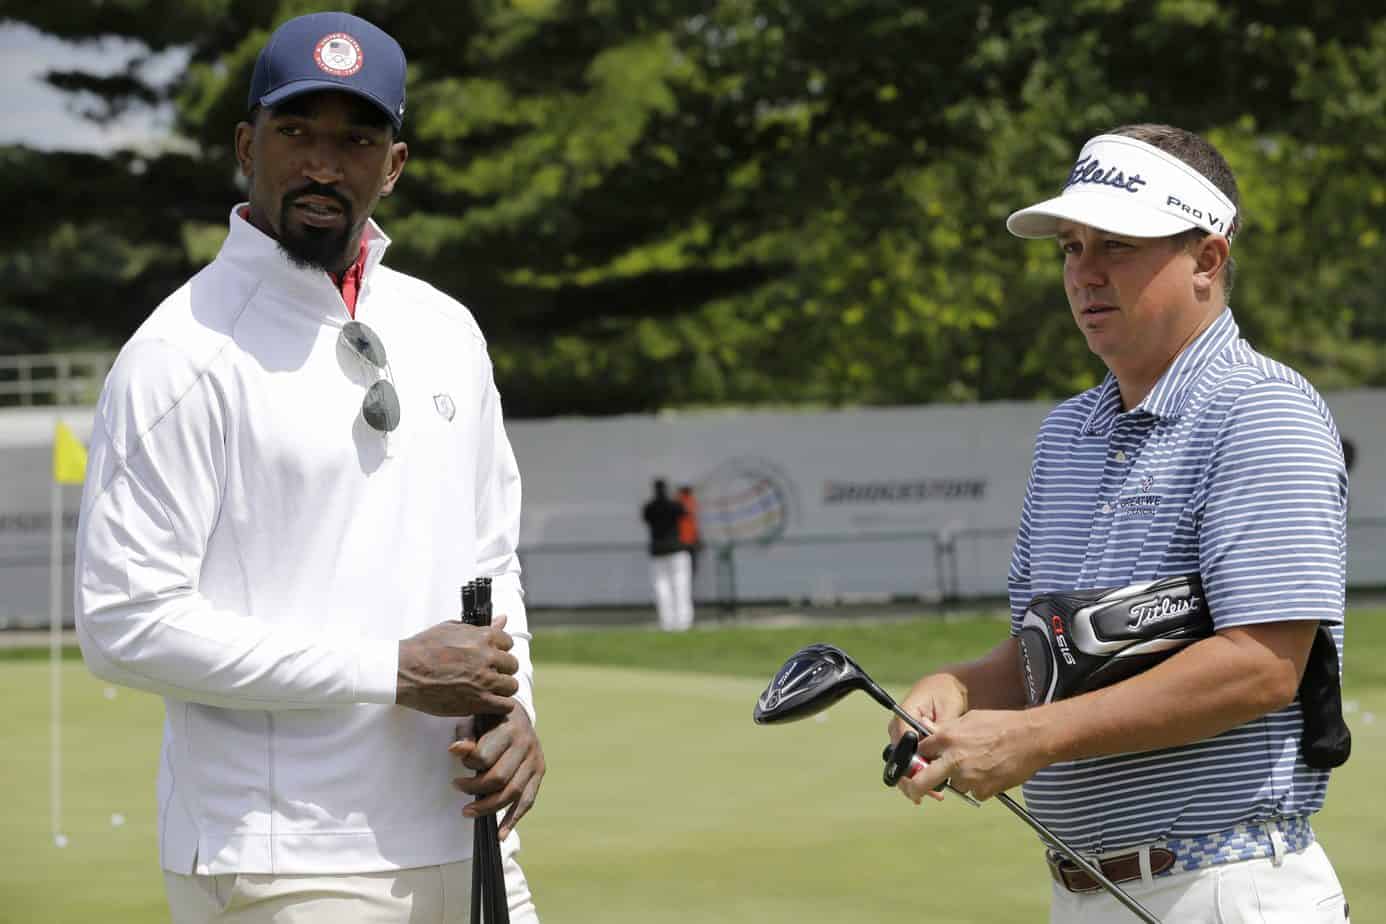 Sports fans have all the jokes after it was announced that JR Smith has plans to play college golf after enrolling at North Carolina A&T